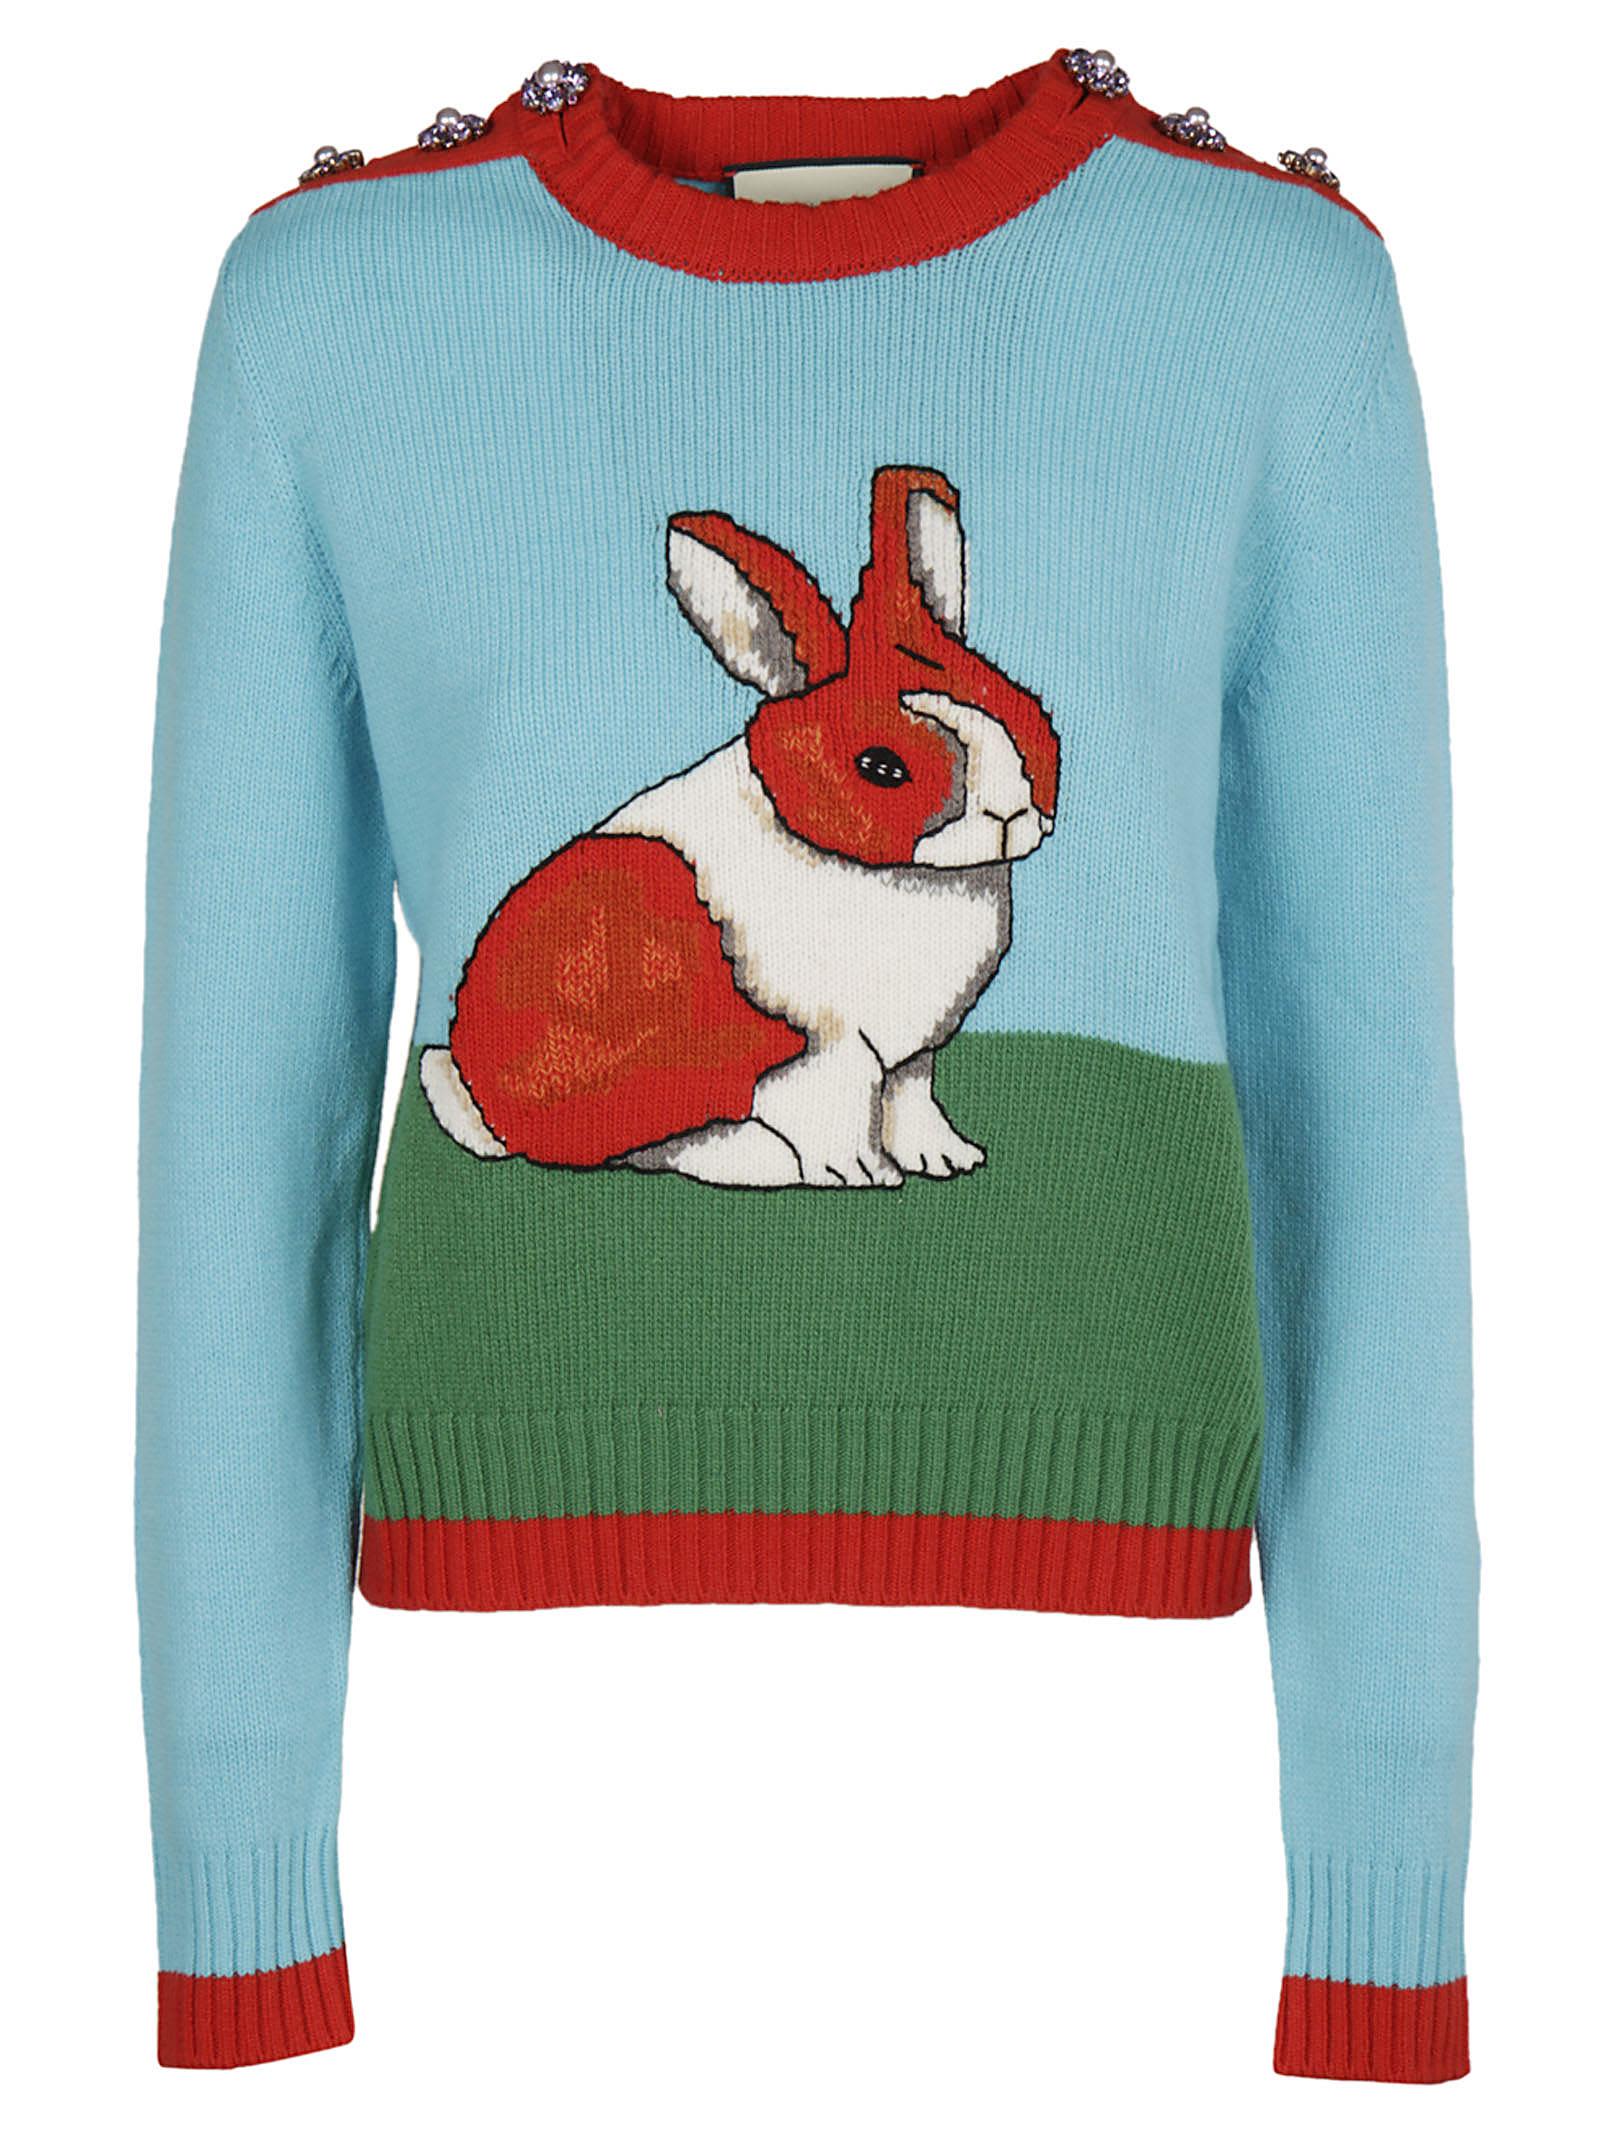 Alphabet Letter: Gucci Bugs Bunny Intarsia Knit Sweater / Gucci Bugs ...